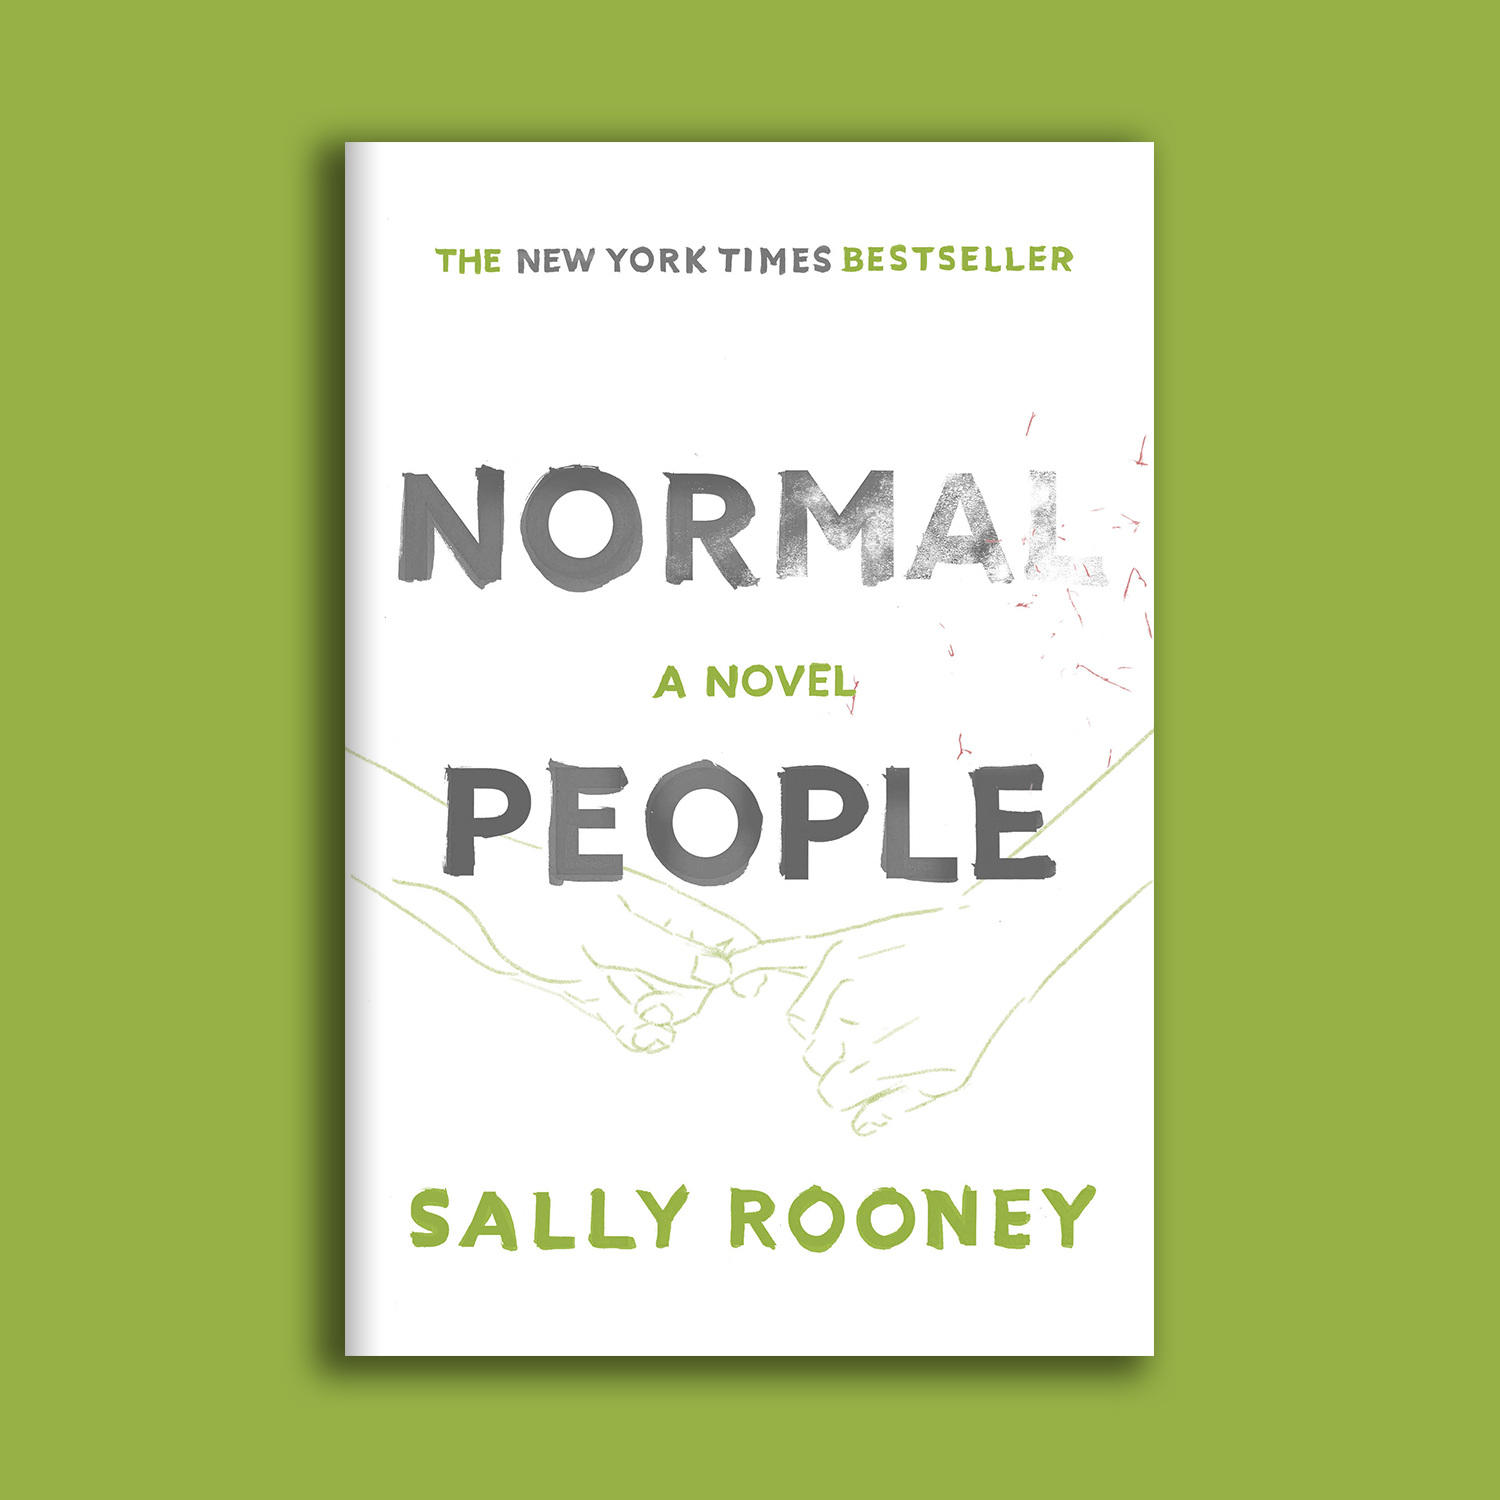 Book cover design of 'Normal People'